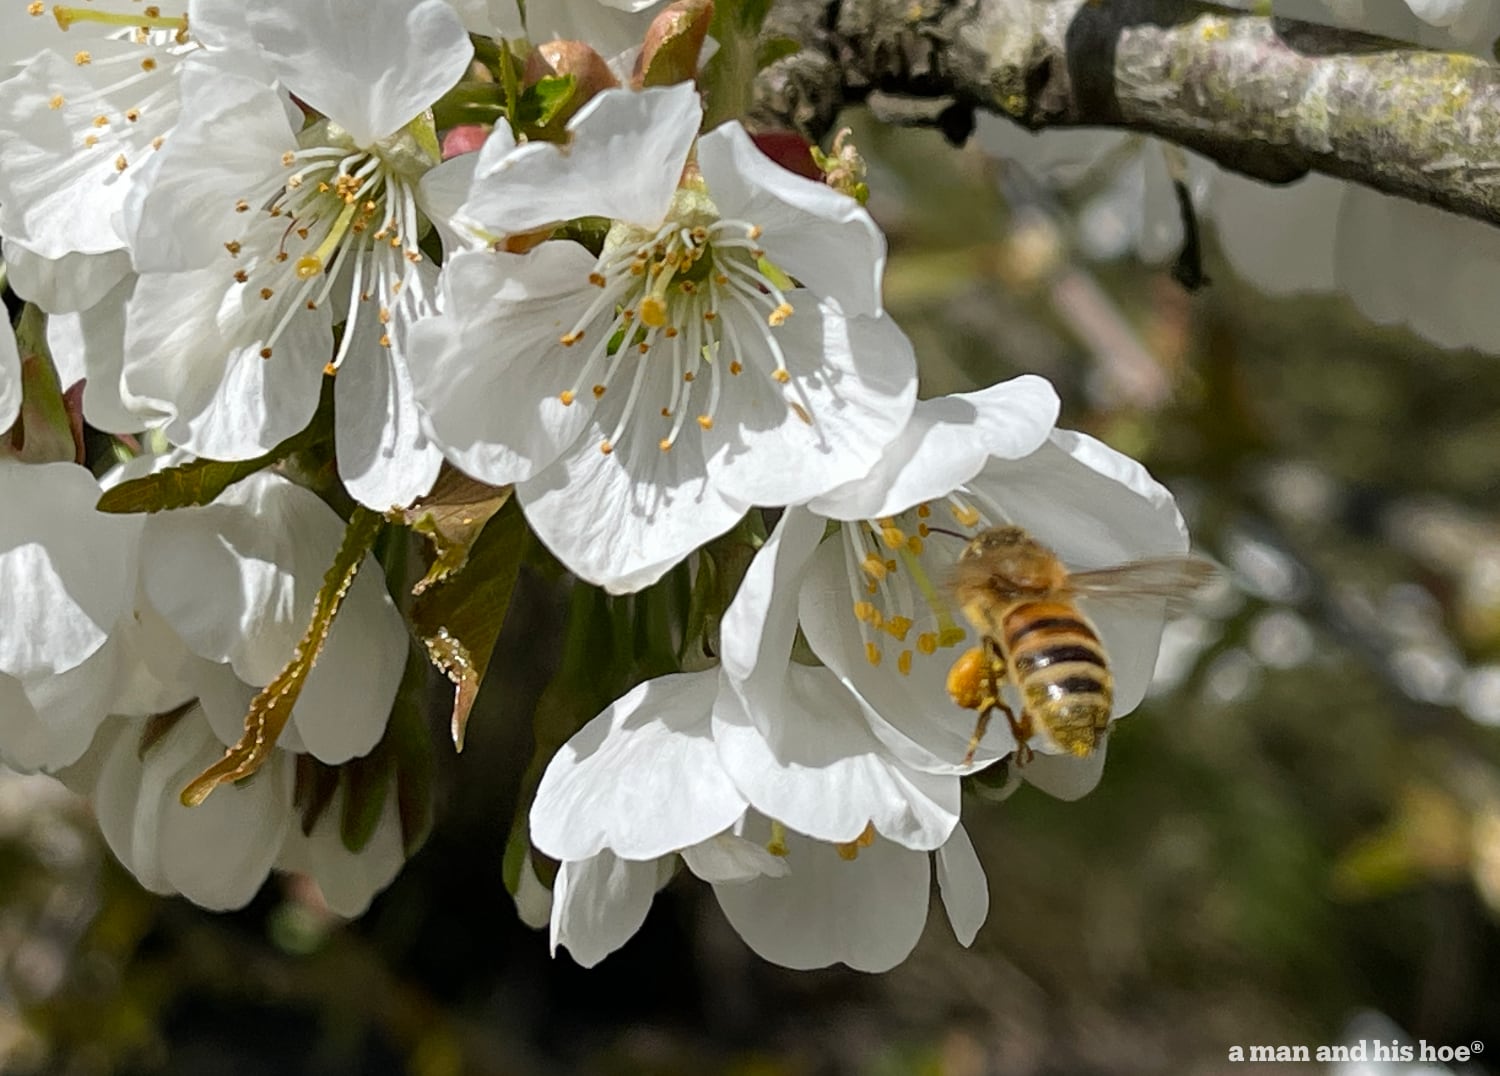 Bee in cherry blossom